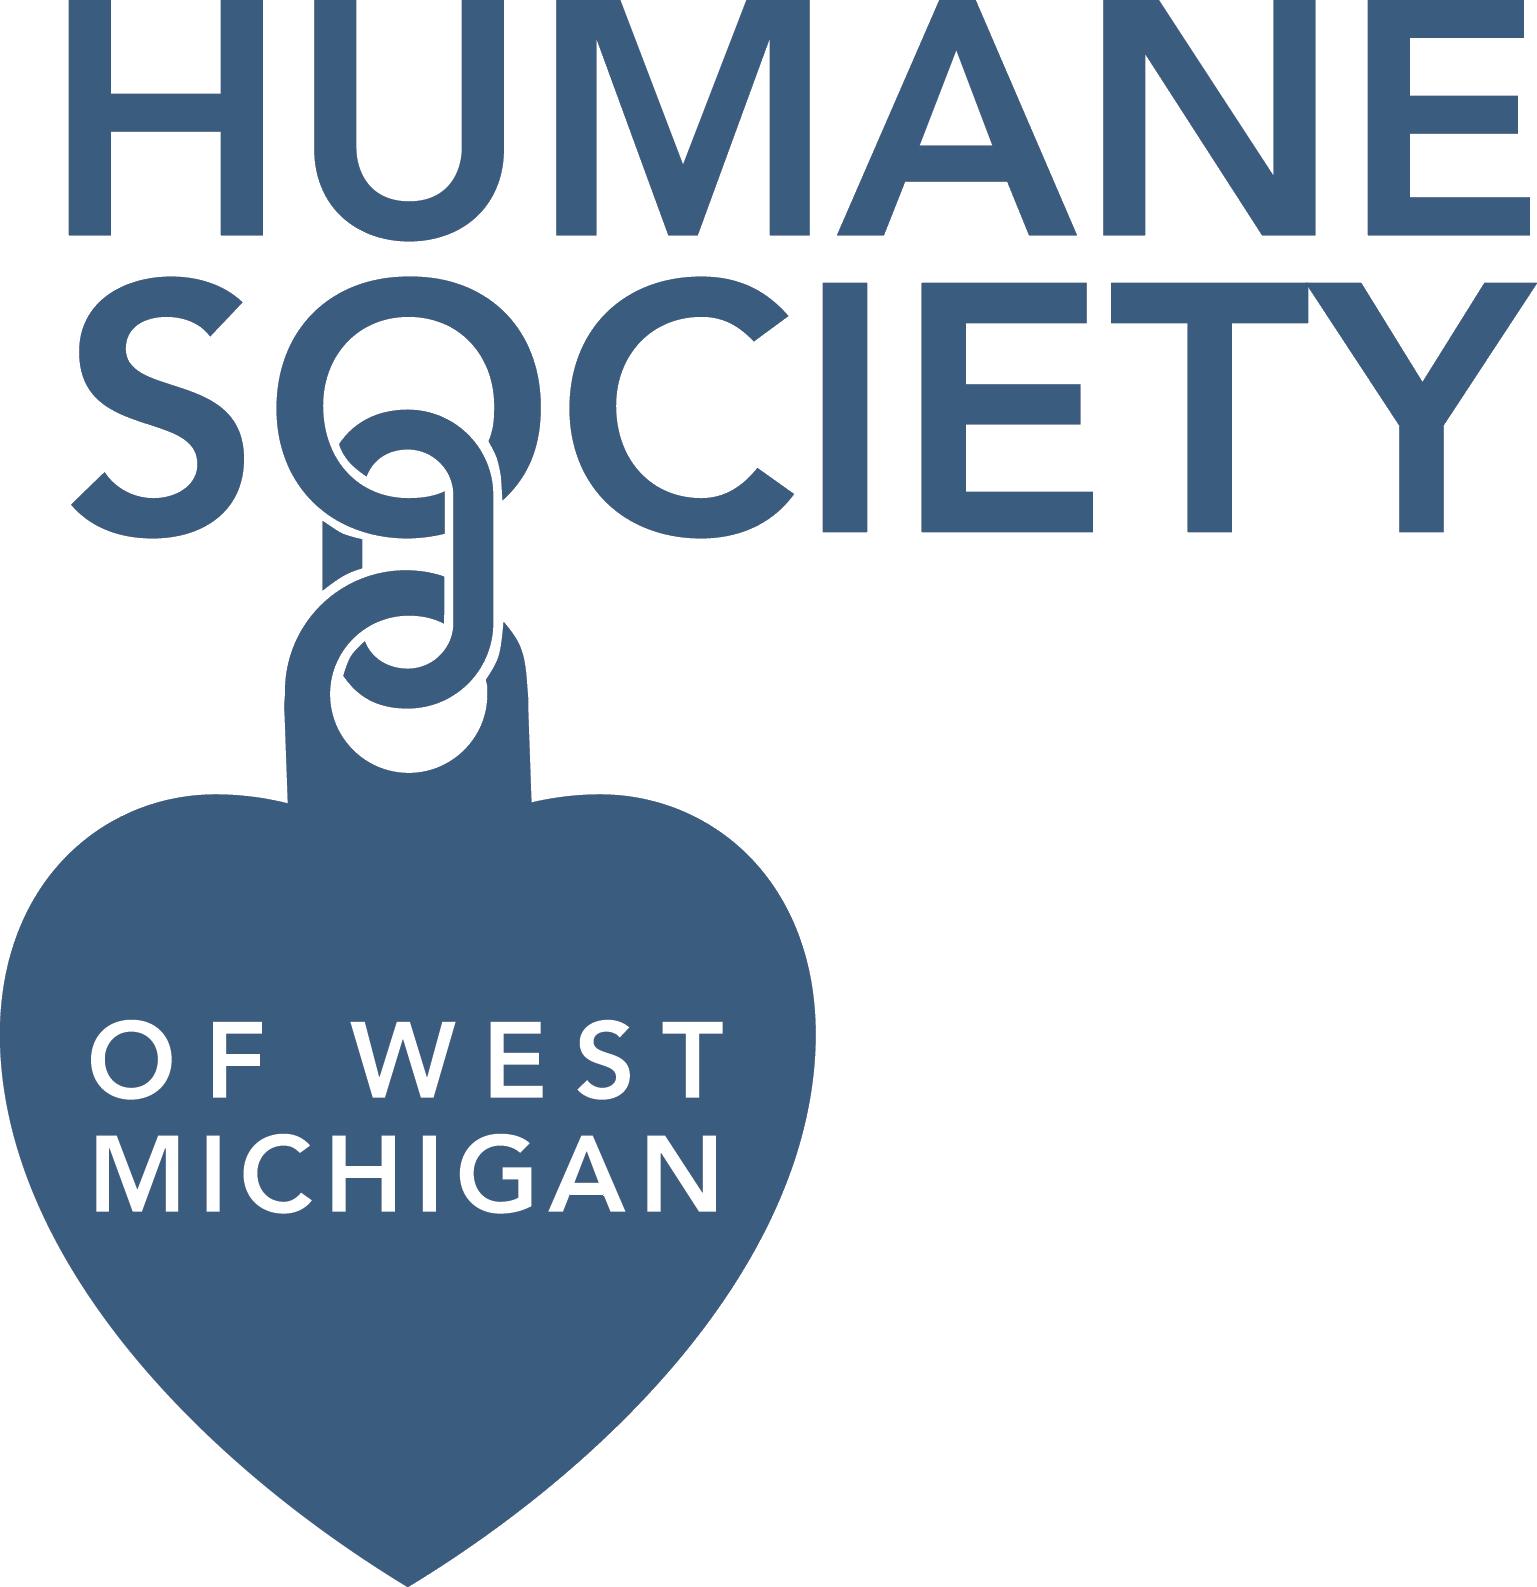 Michigan humane society conduent education phone number